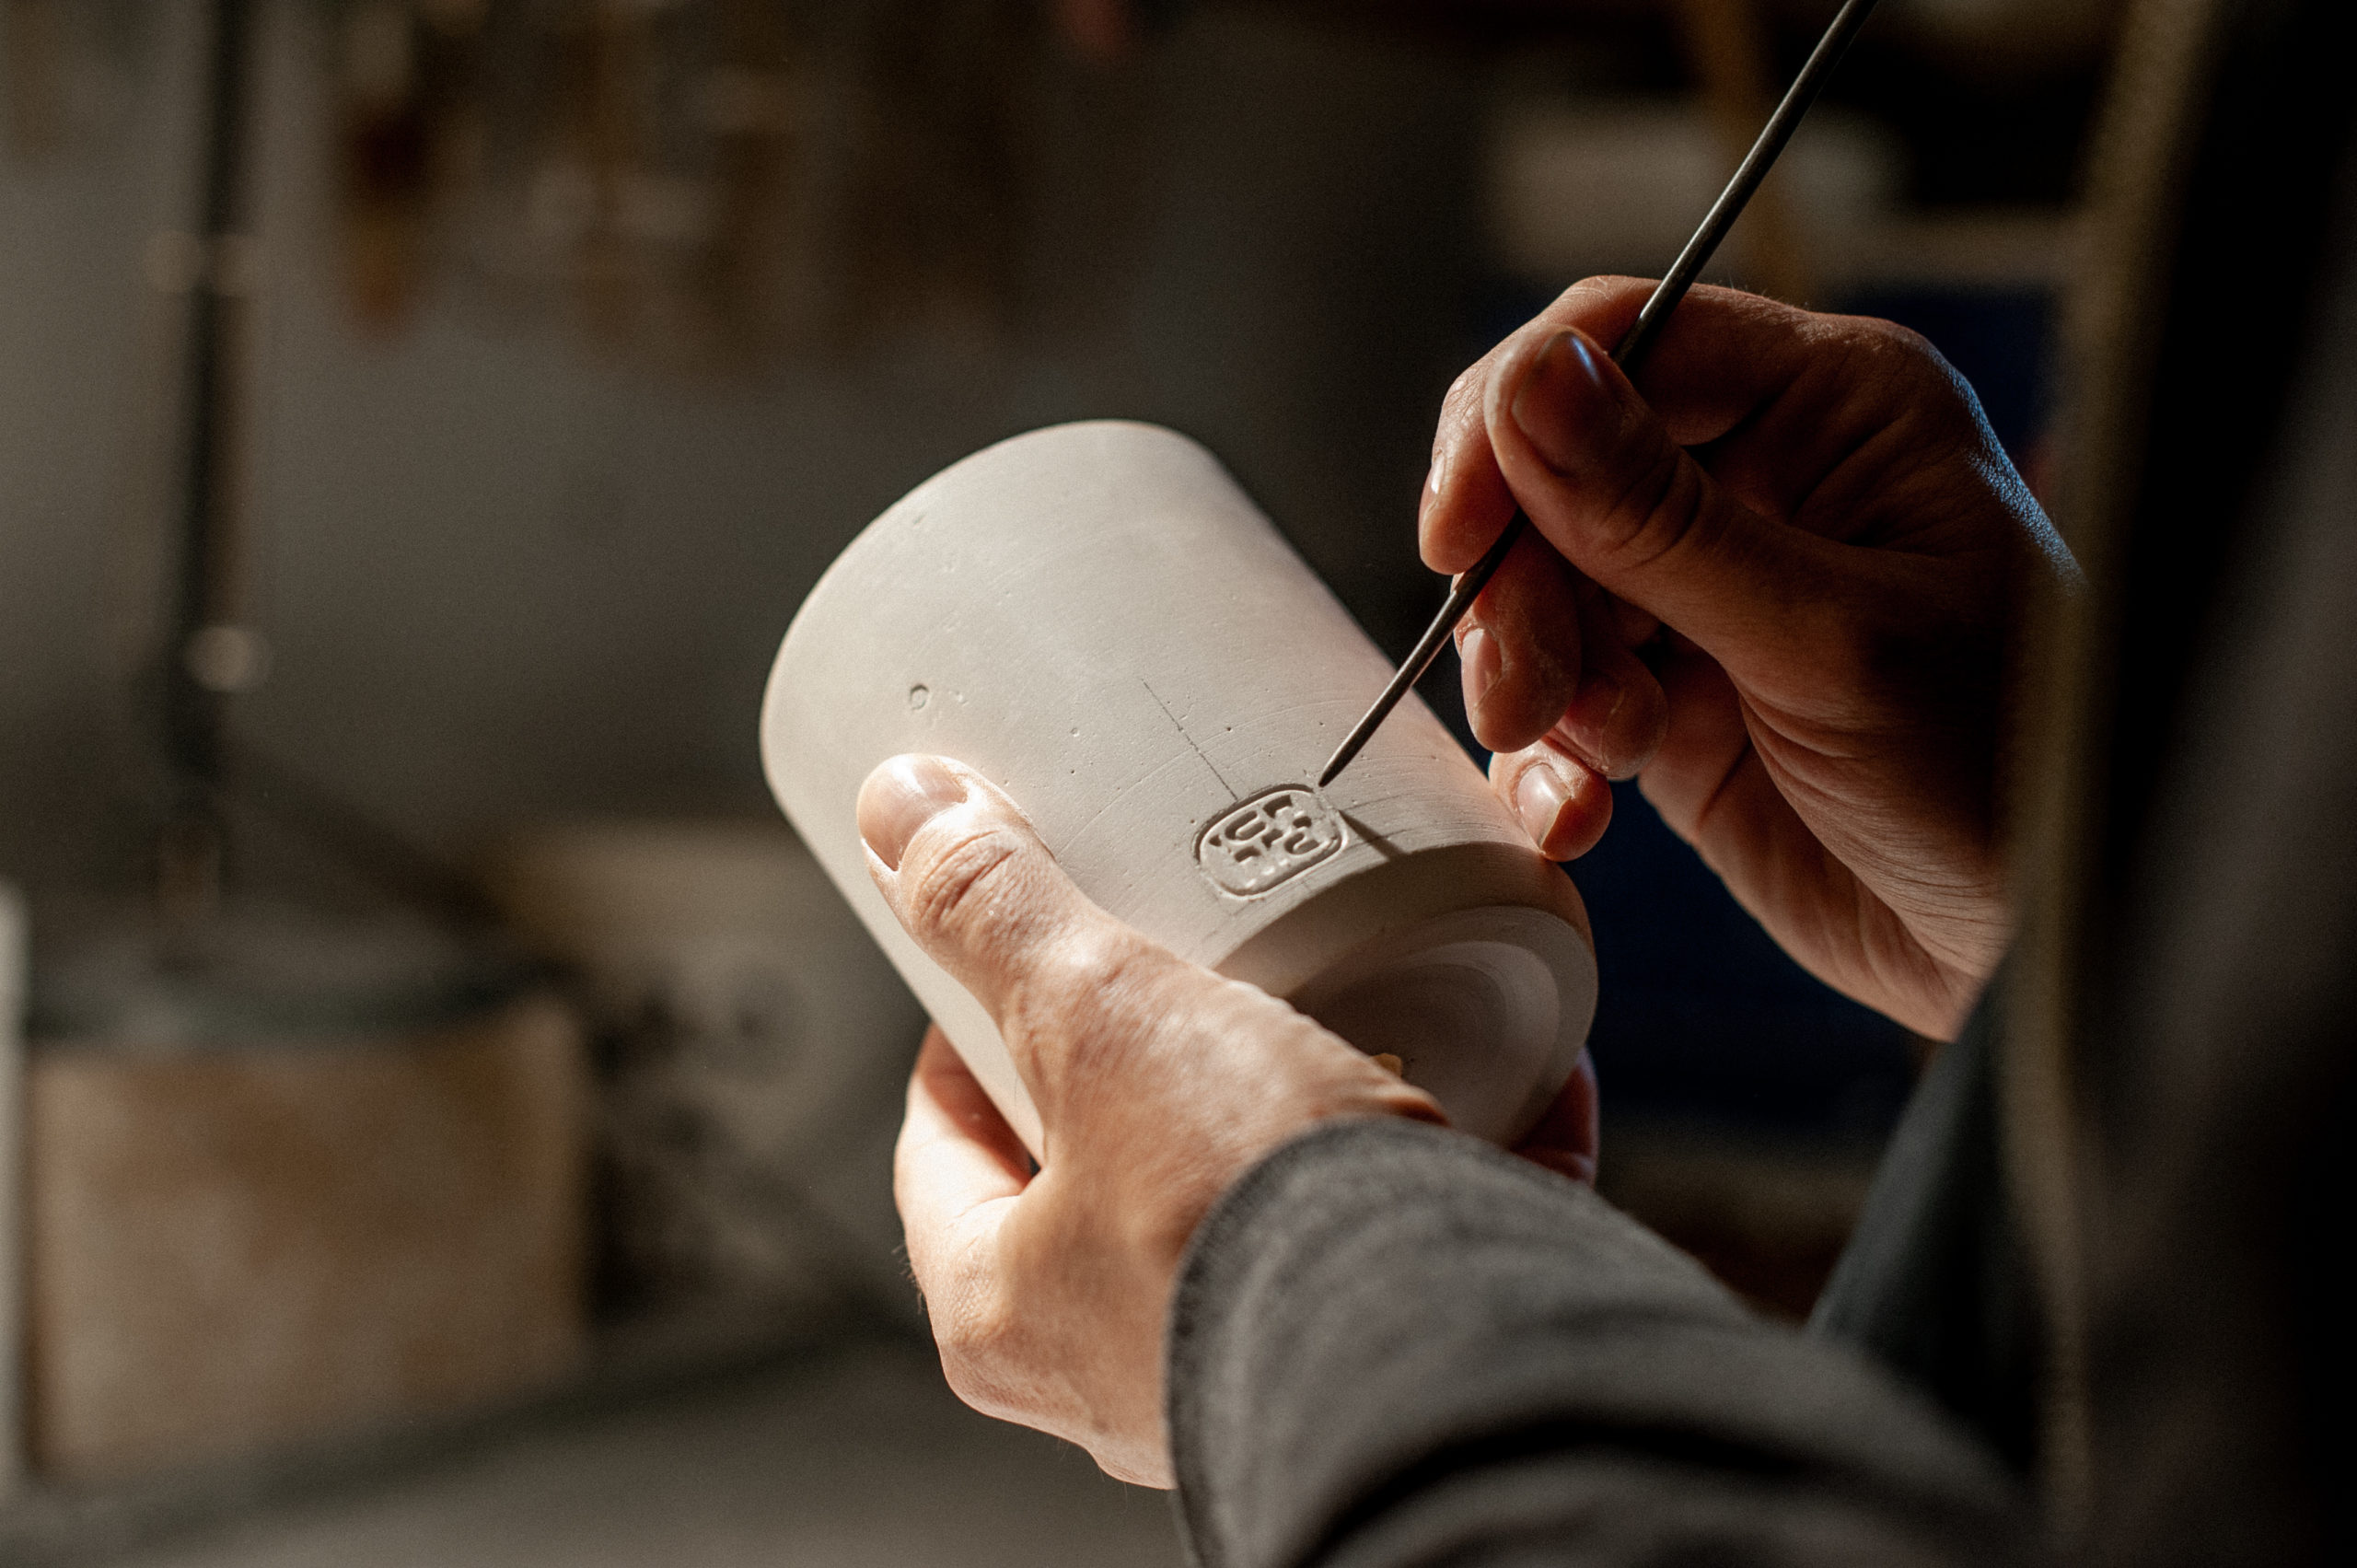 Ruddell Hackney in his home studio hand carving the new rounded HCMA logo into a slipcast mug to soon be used for a mold.